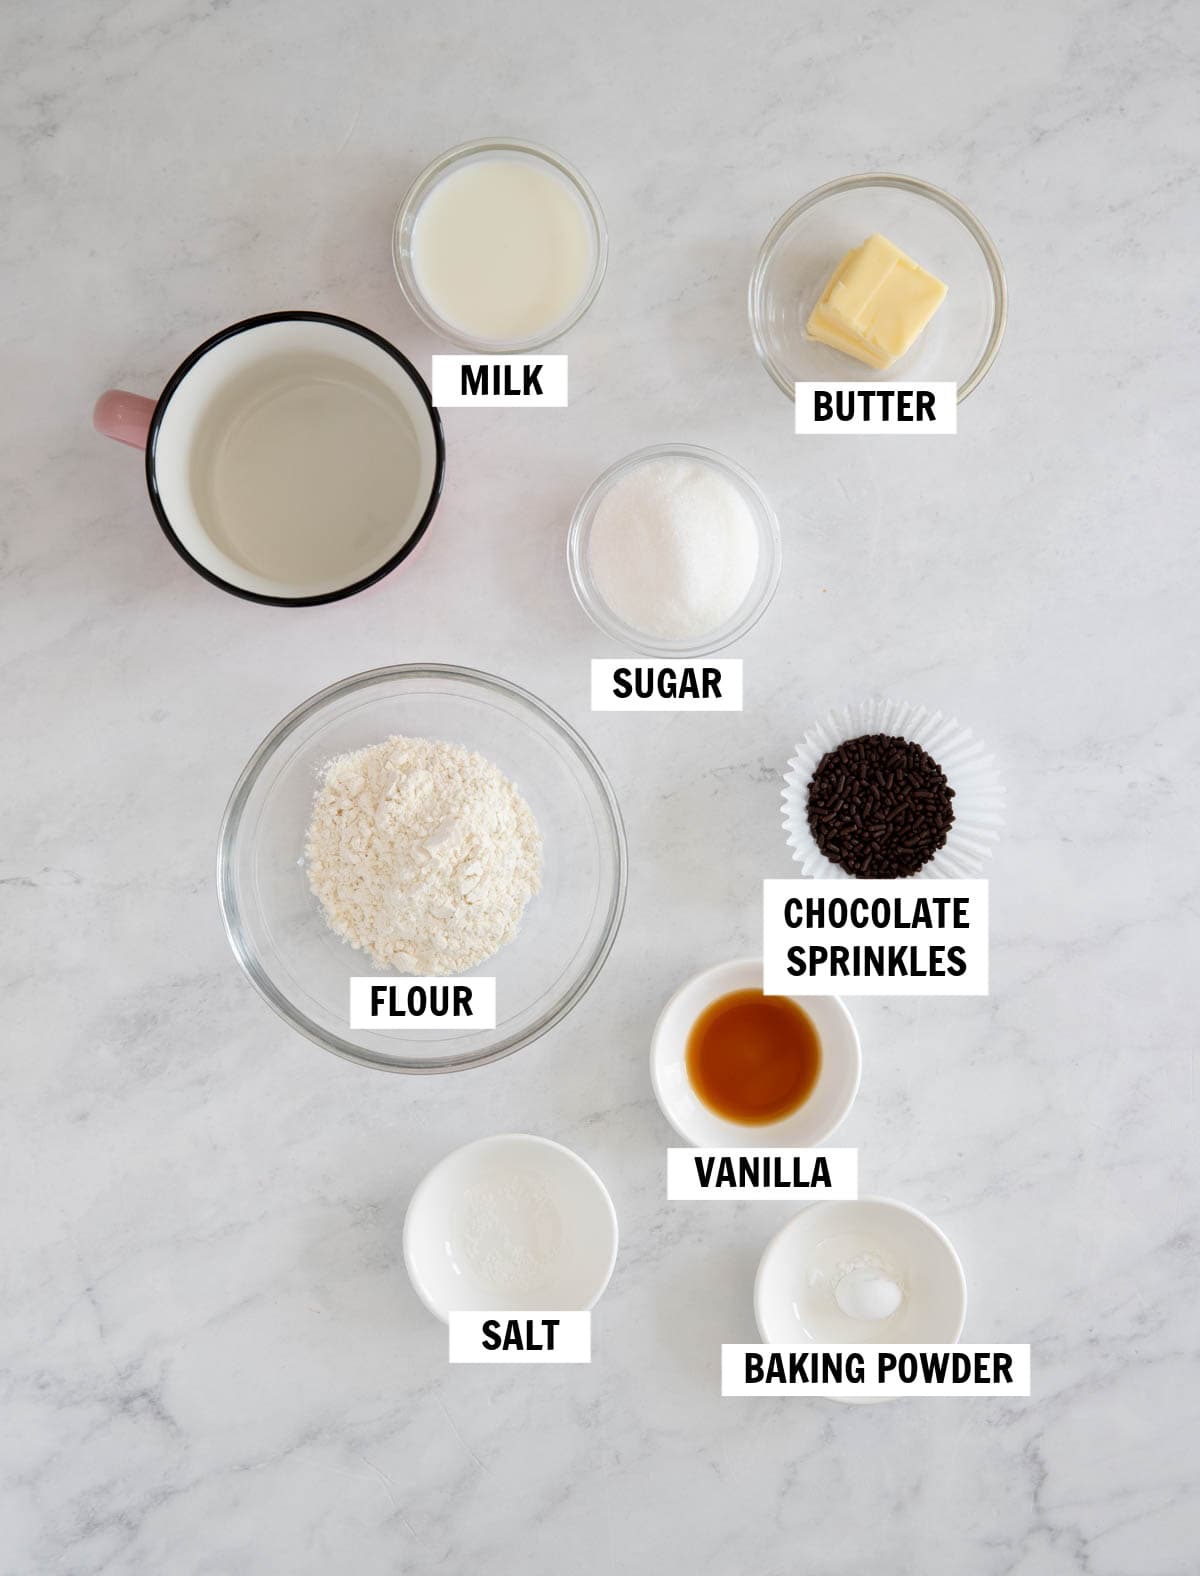 All of the ingredients for vanilla mug cake in bowls on a white countertop including flour, sugar, butter, milk, vanilla, baking powder, salt and chocolate sprinkles.